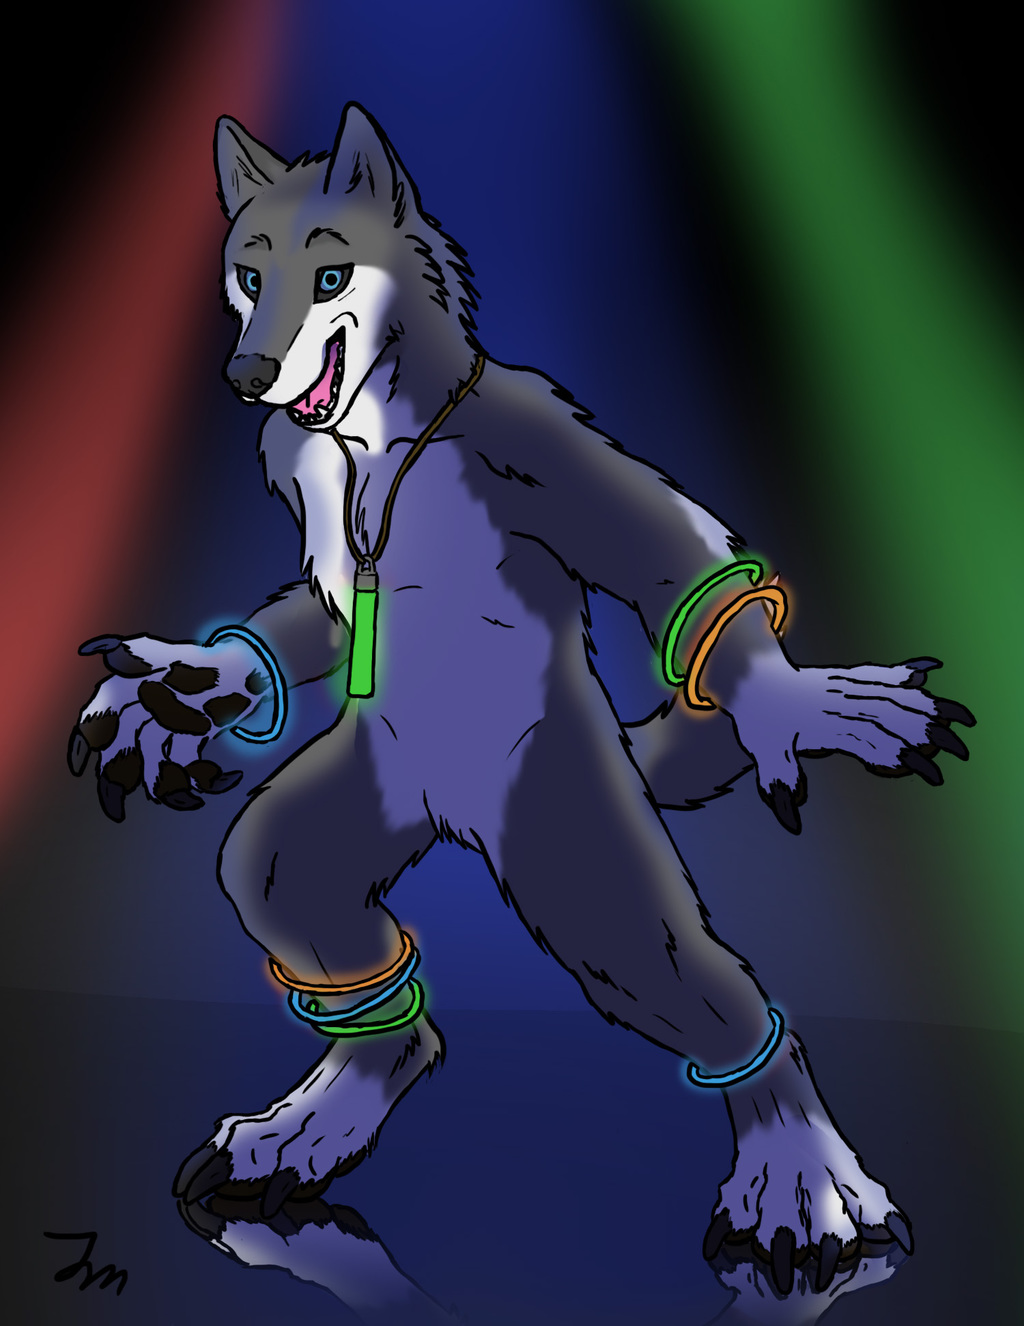 Most recent image: Rave Wolf